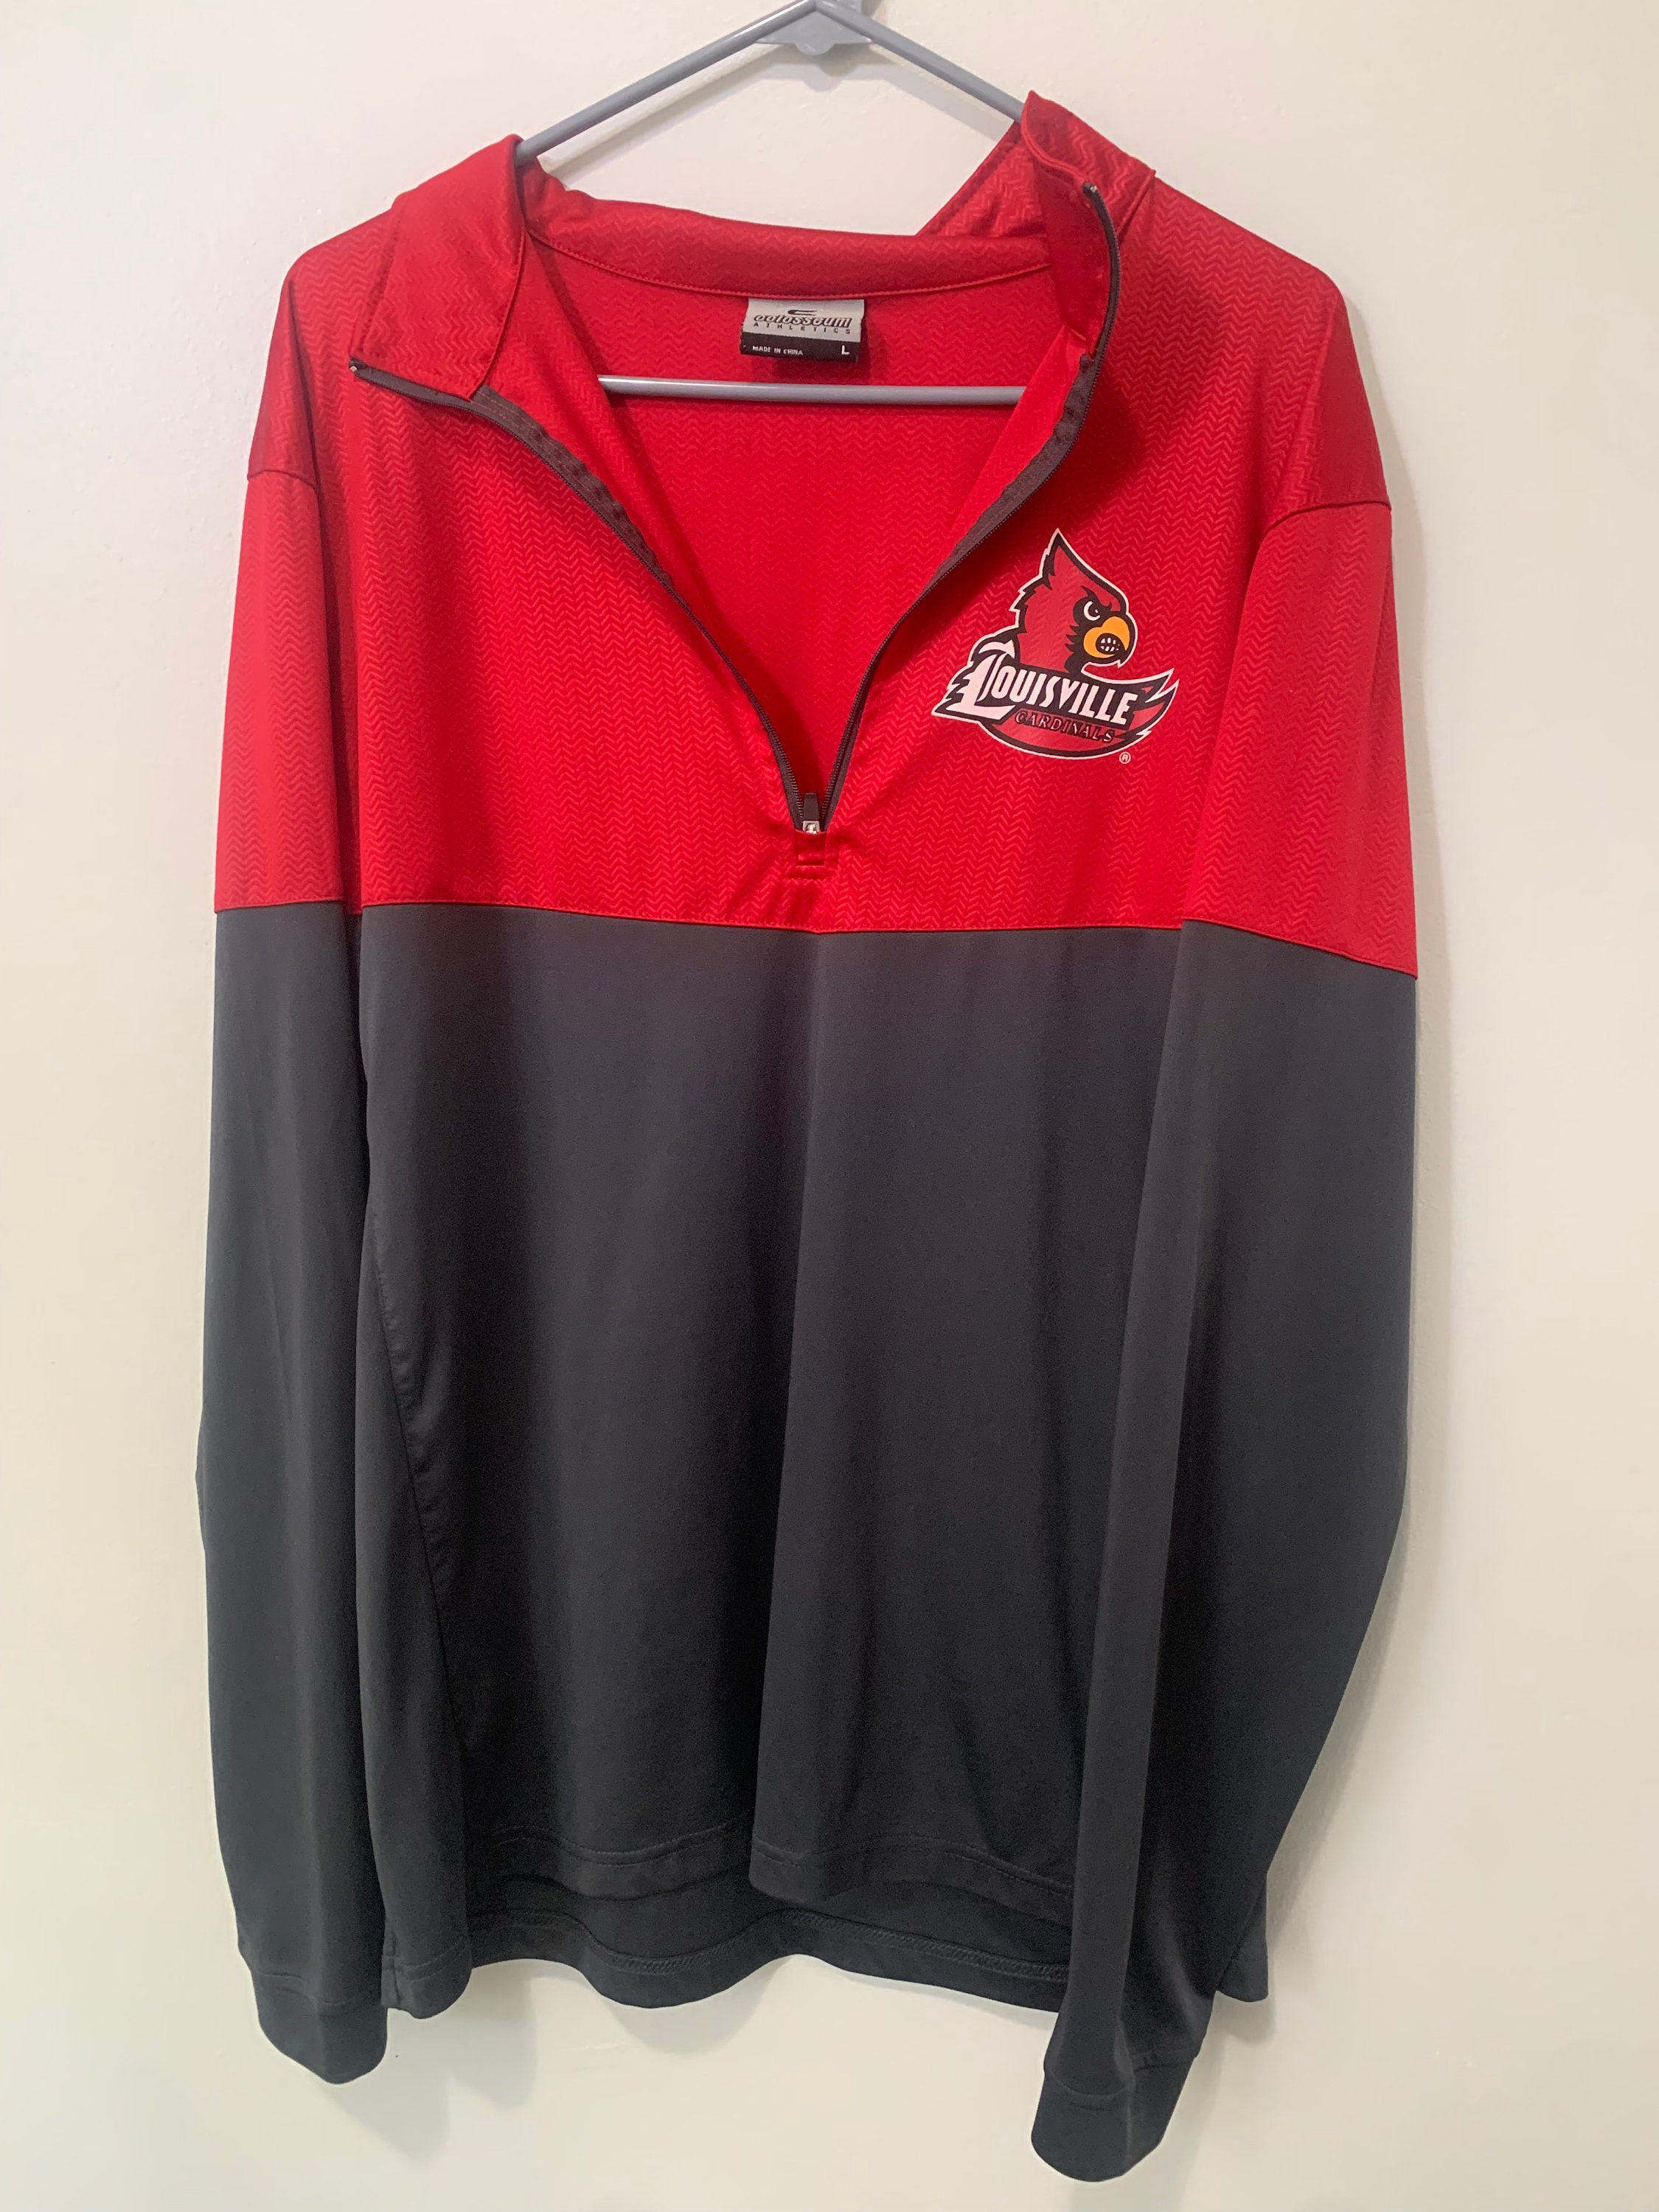 University of Louisville Official Stacked Unisex Adult Pull-Over Hoodie